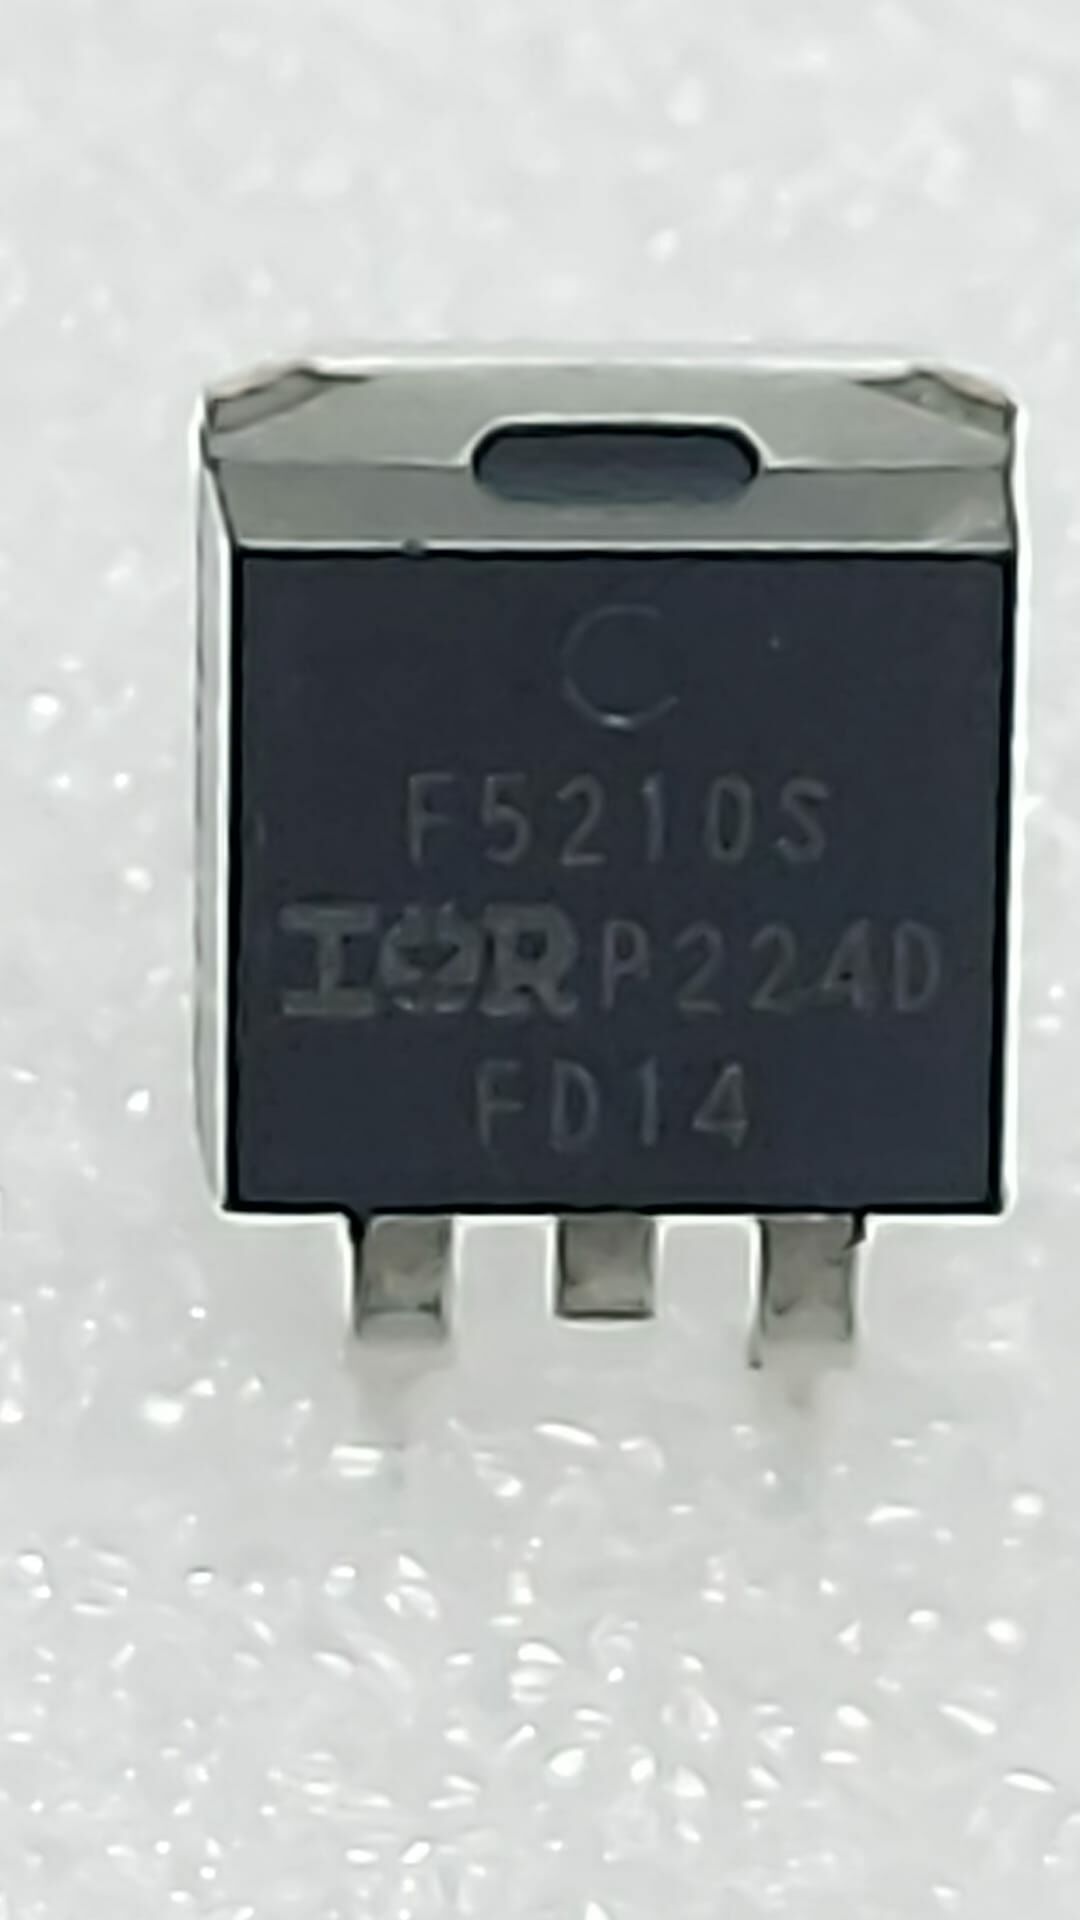 IRF5210S  (F5210S)